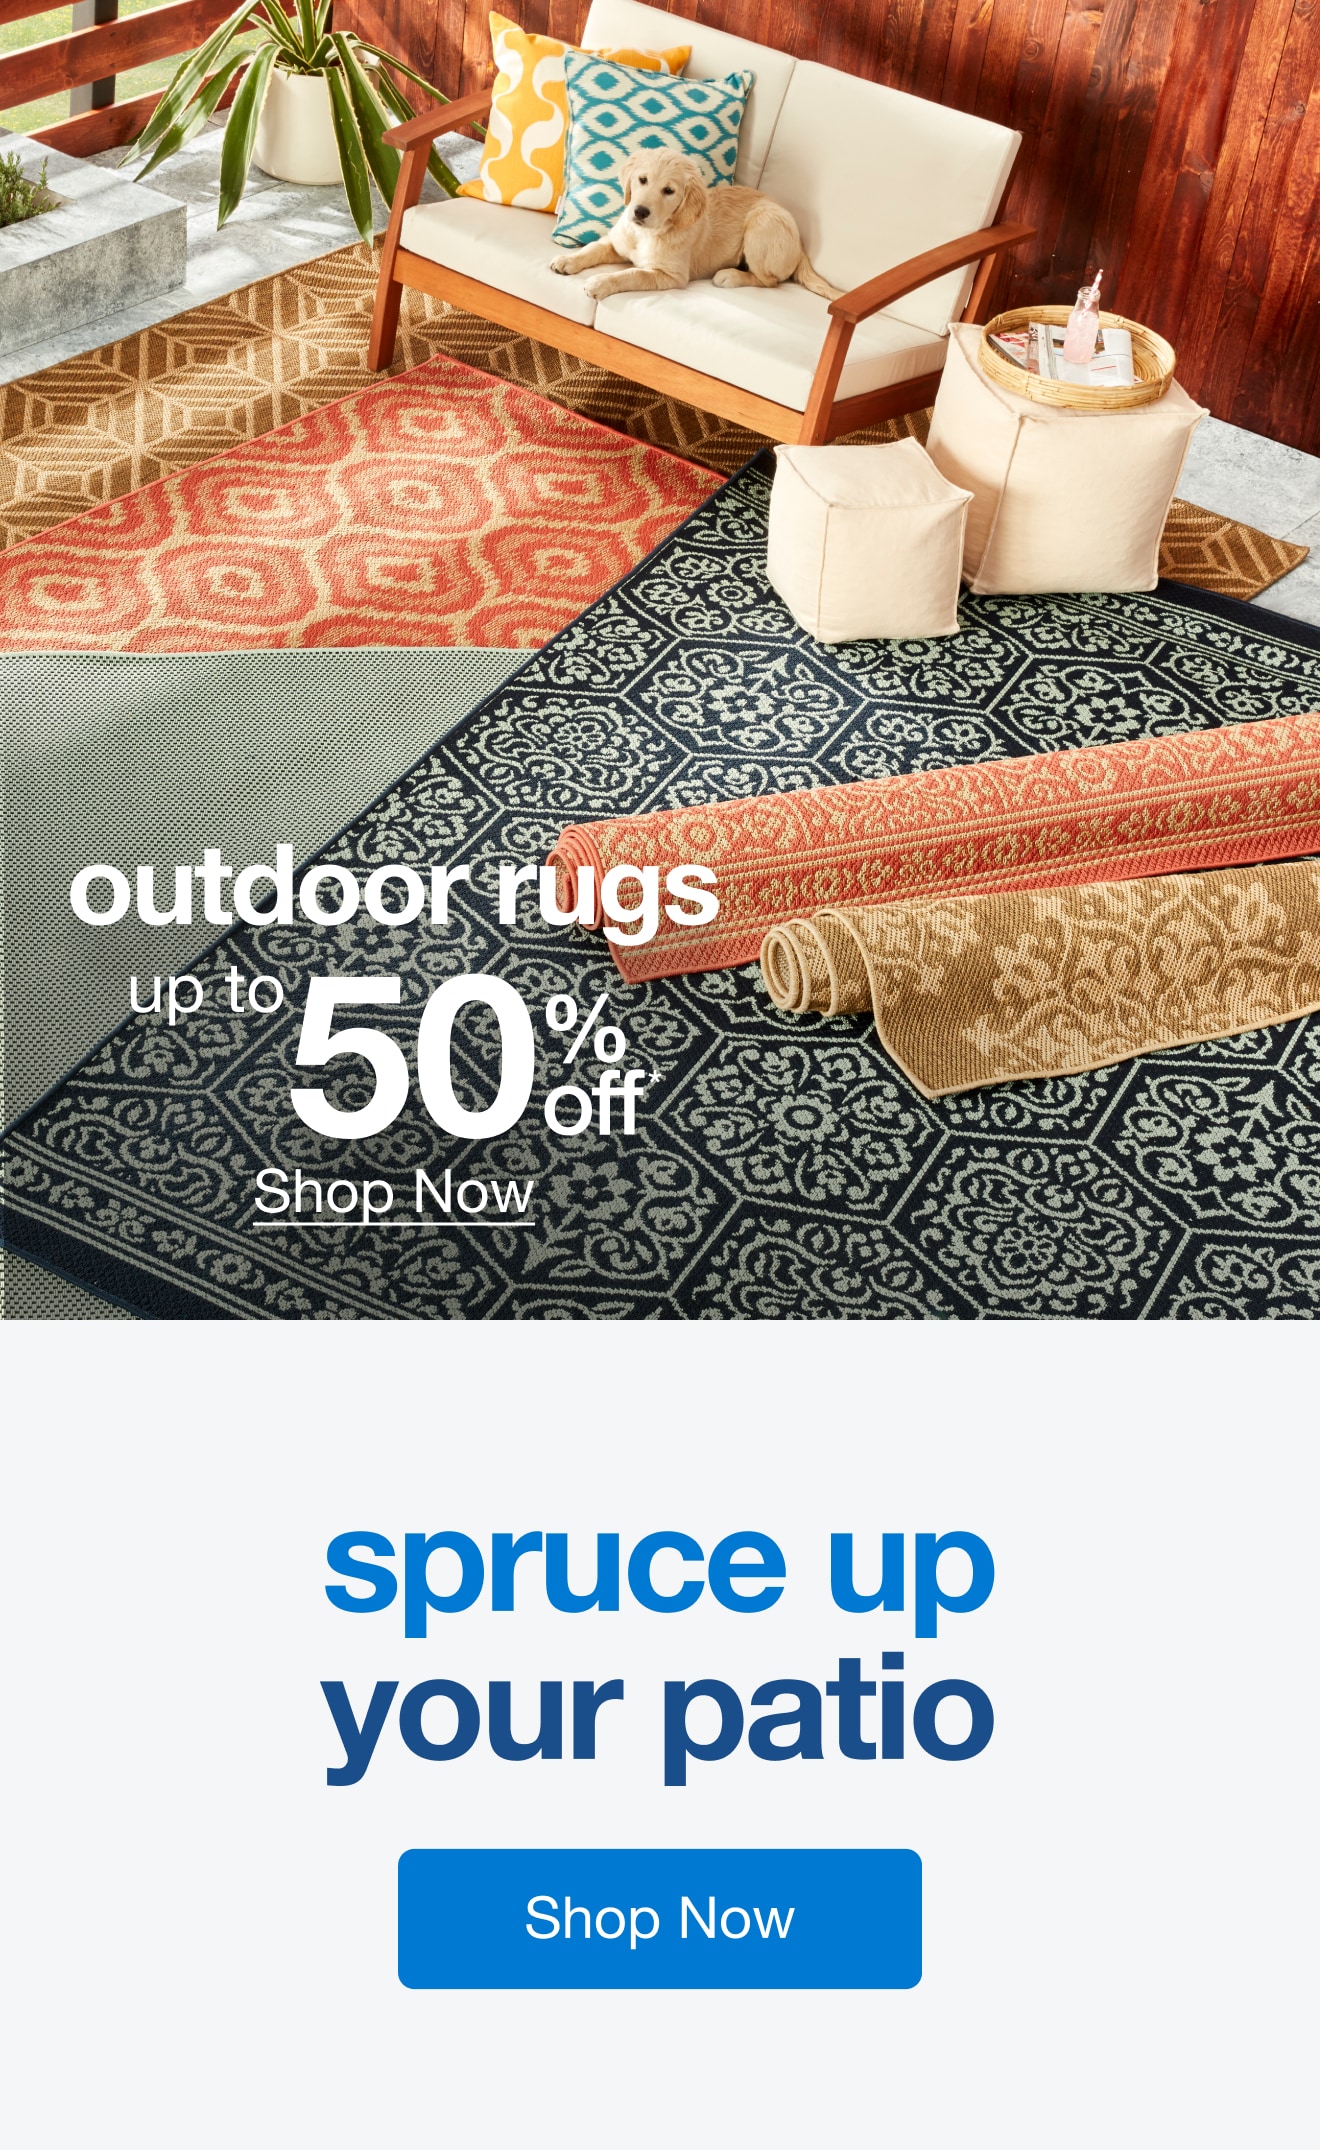 Up to 50% Off Outdoor Rugs — Shop Now!